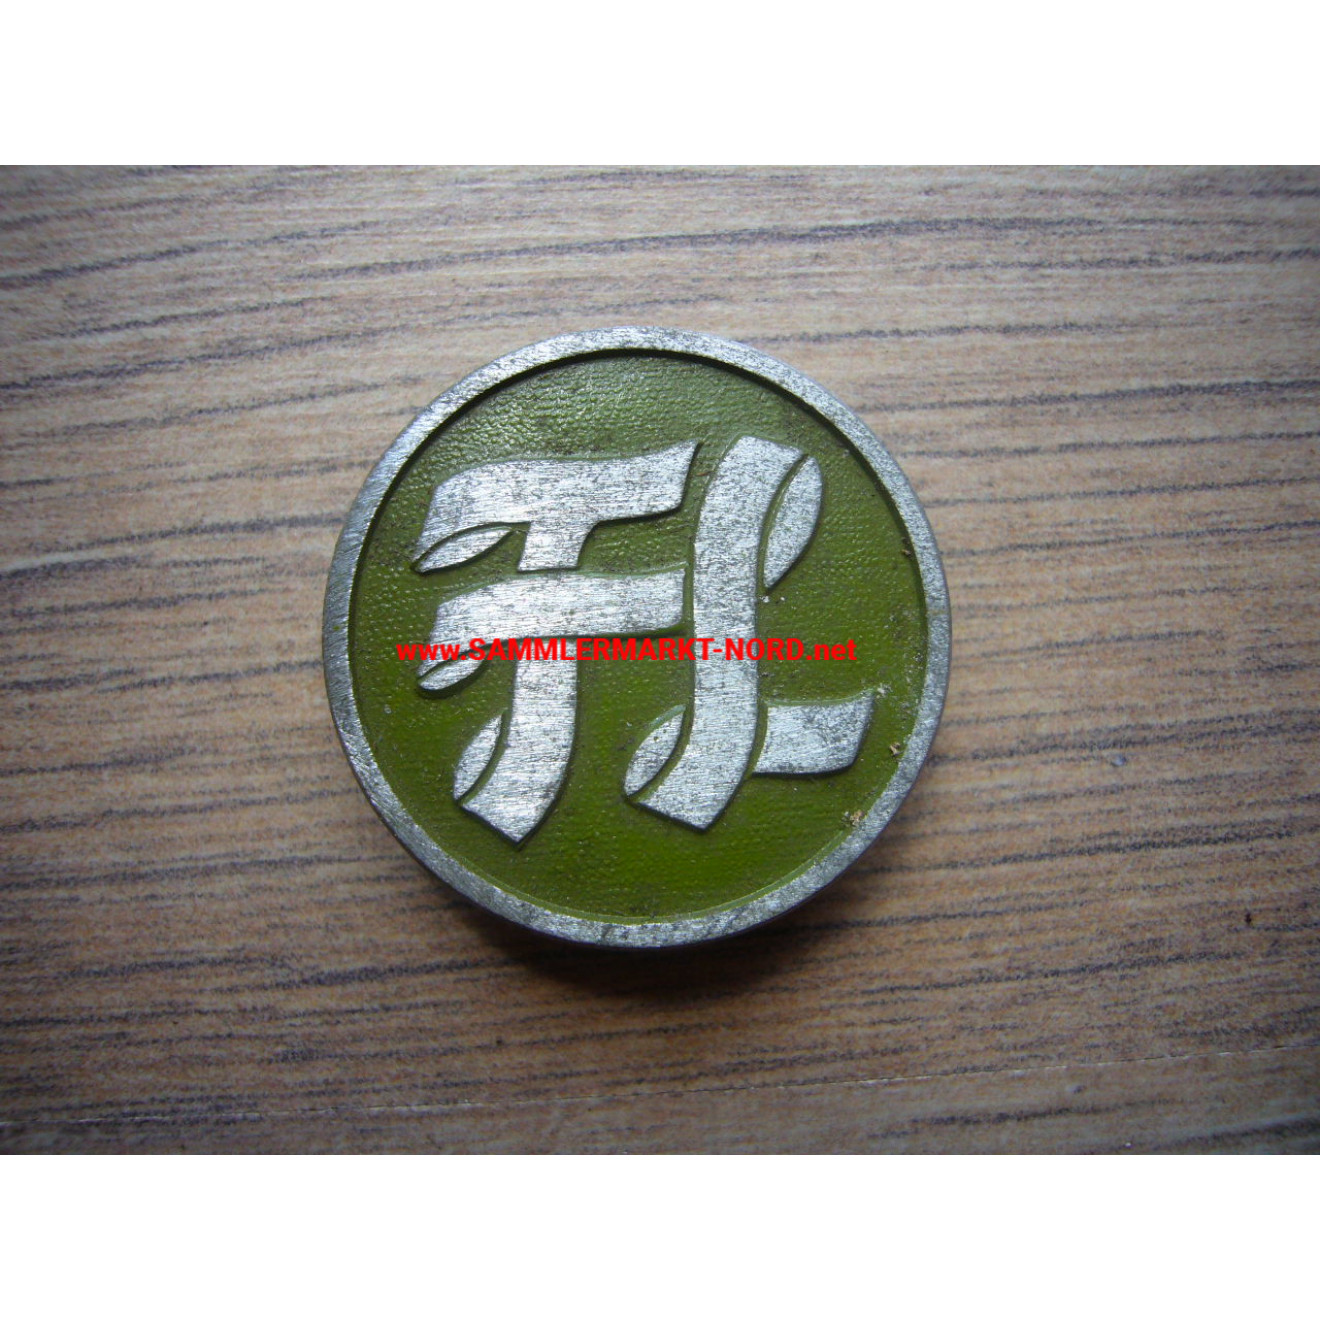 FAHLBERG-LIST company, Magdeburg - armaments factory - identity badge for employees (buttonhole)